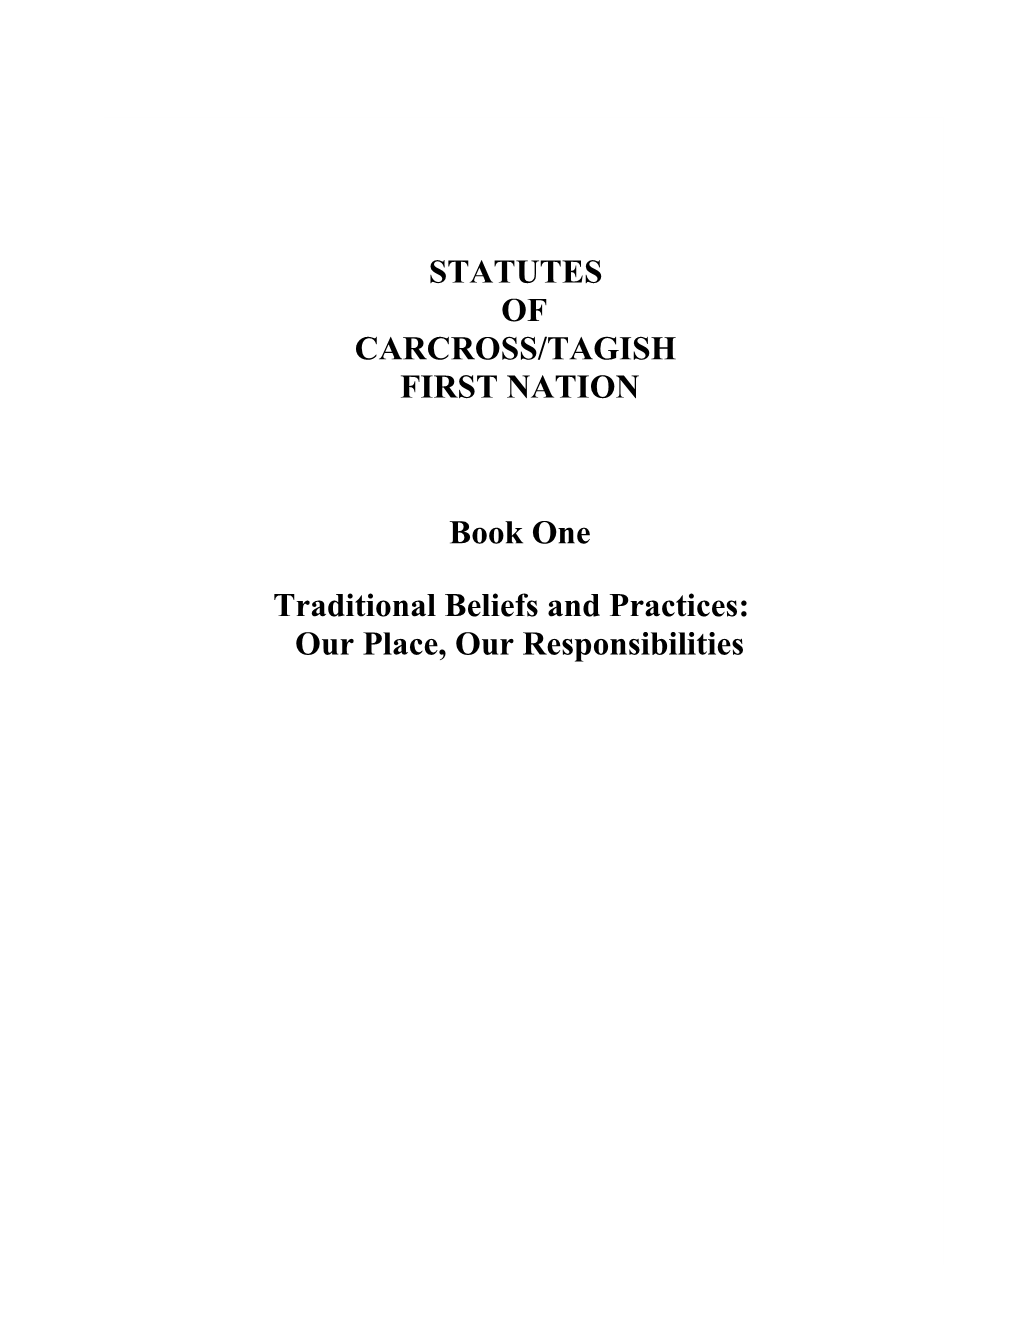 C/TFN Statute Book One: Our Place, Our Responsibilities